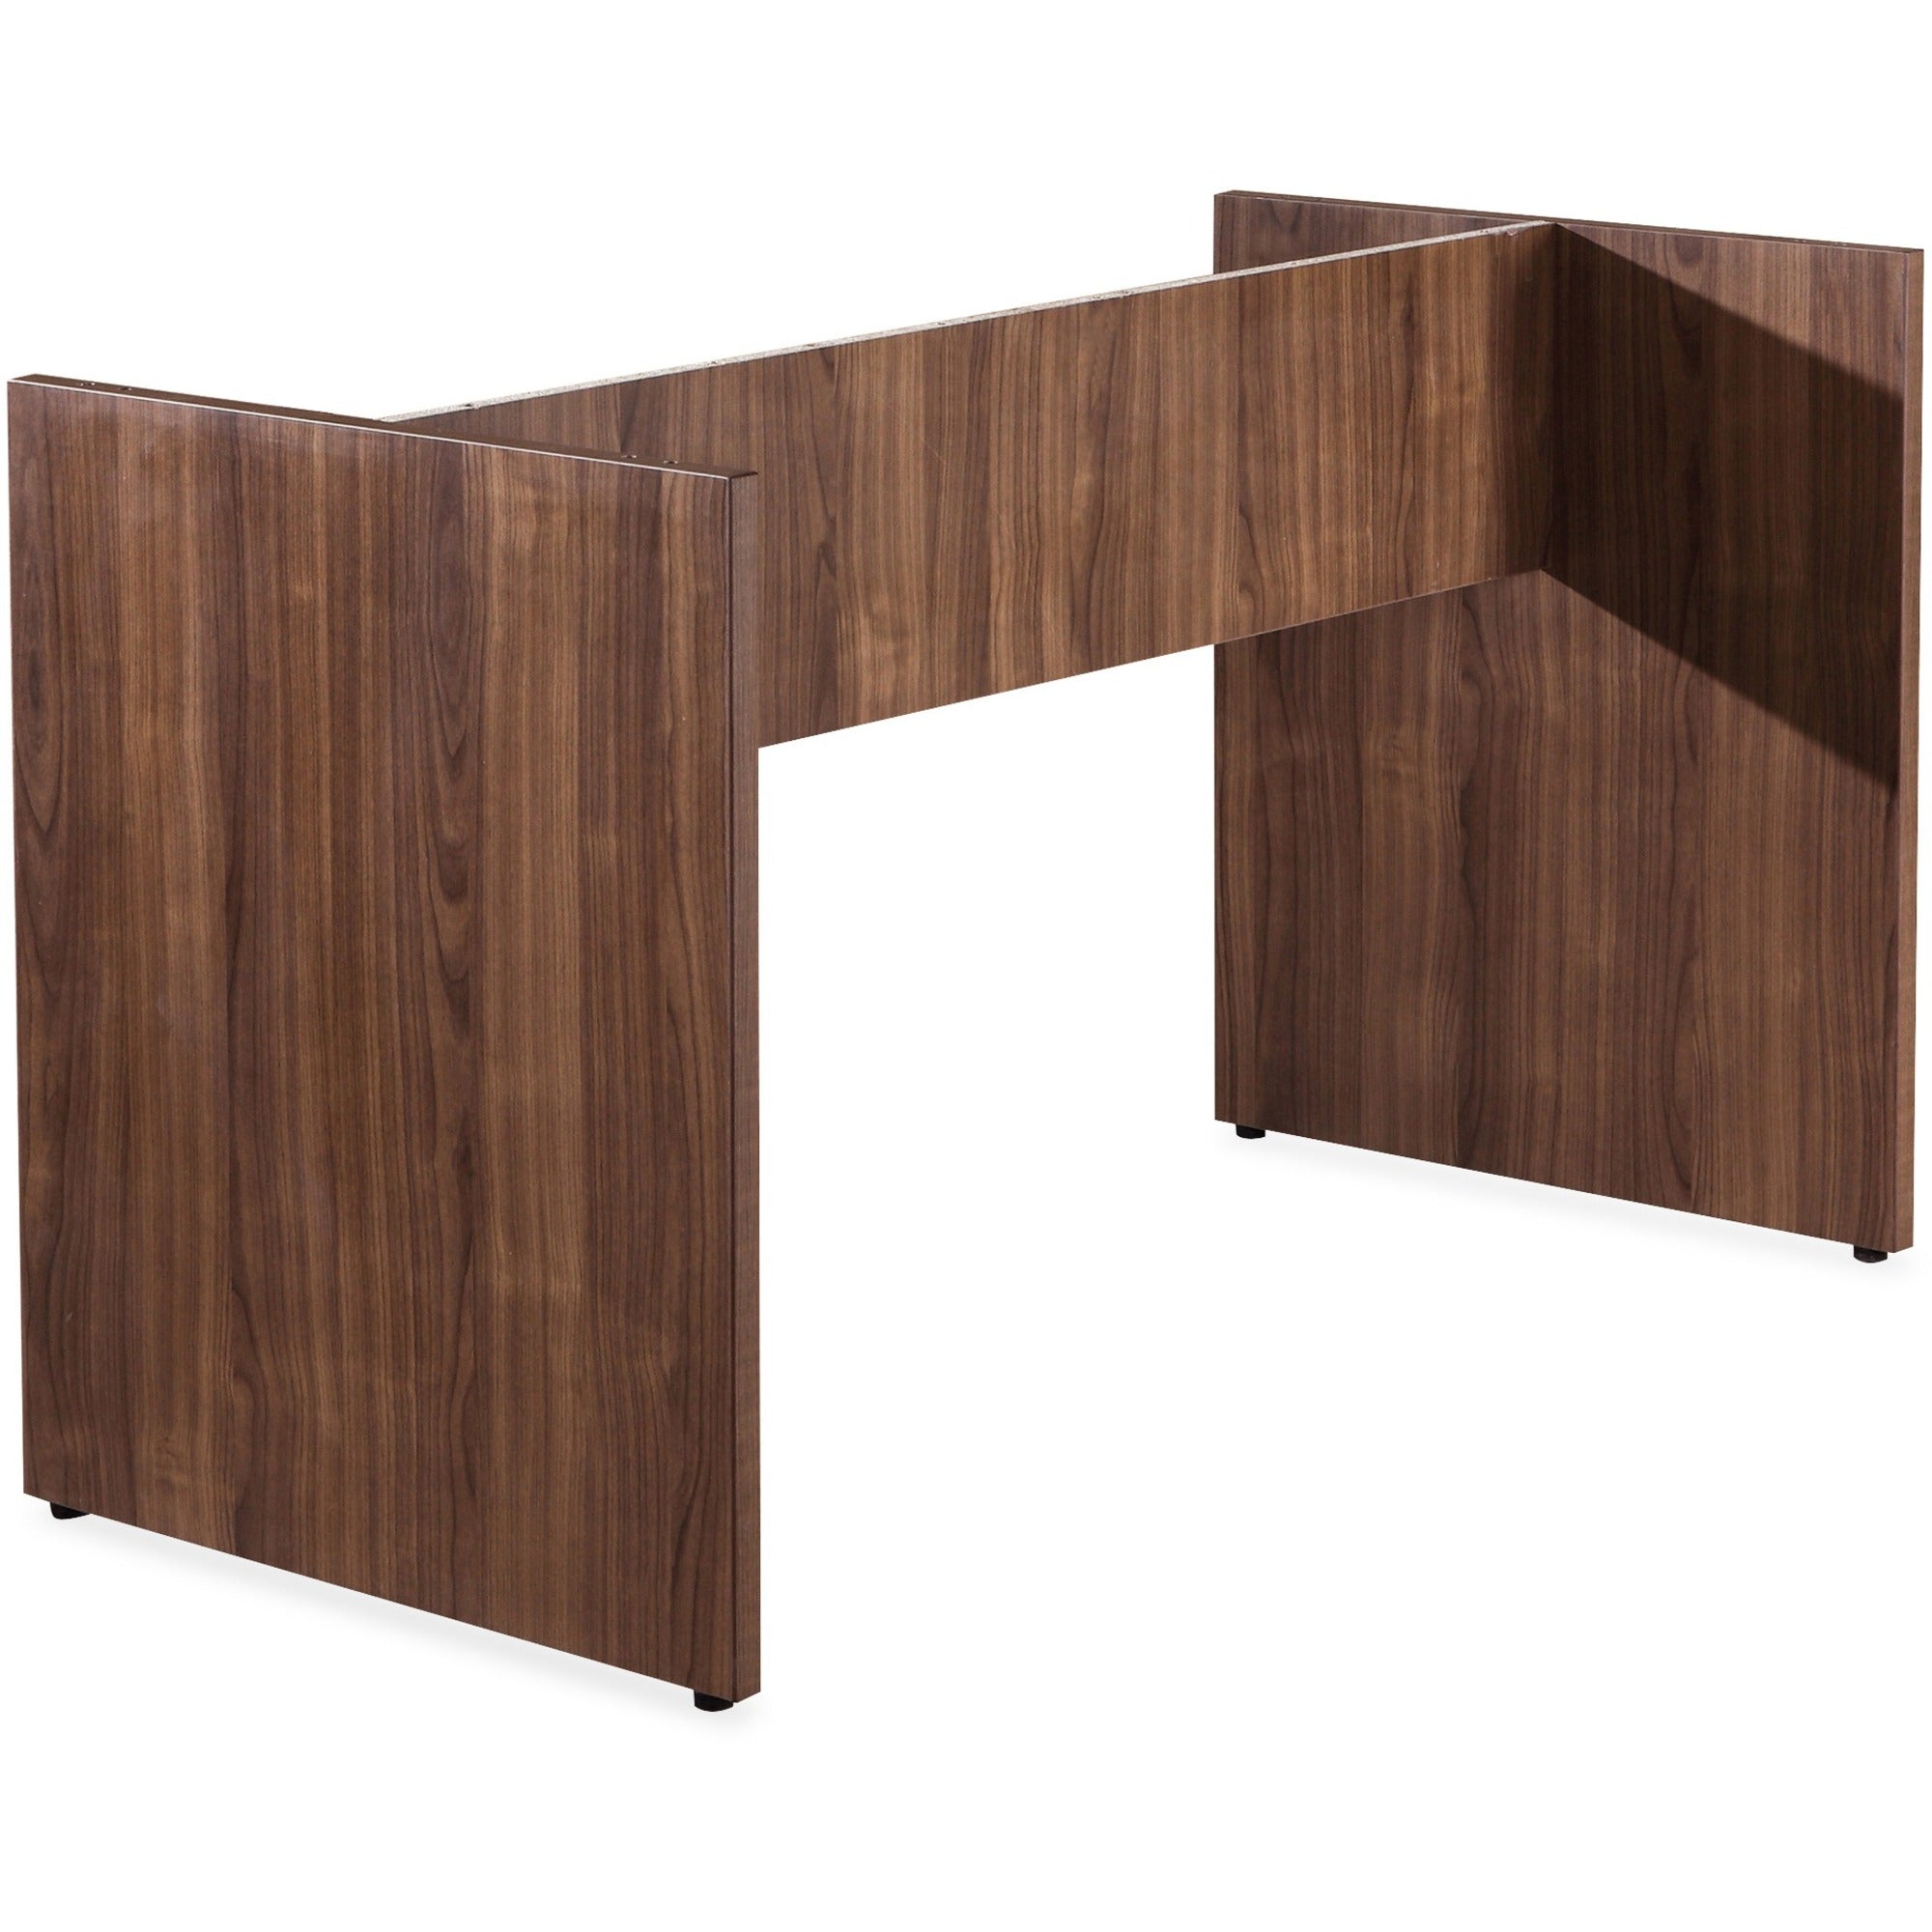 Lorell Essentials 8' Conference Table Base - Two Leg Base - 2 Legs x 49.63" Table Top Width x 23.63" Table Top Depth - 28.50" Height - Laminated, Walnut - P2 Particleboard - 1 Each - 